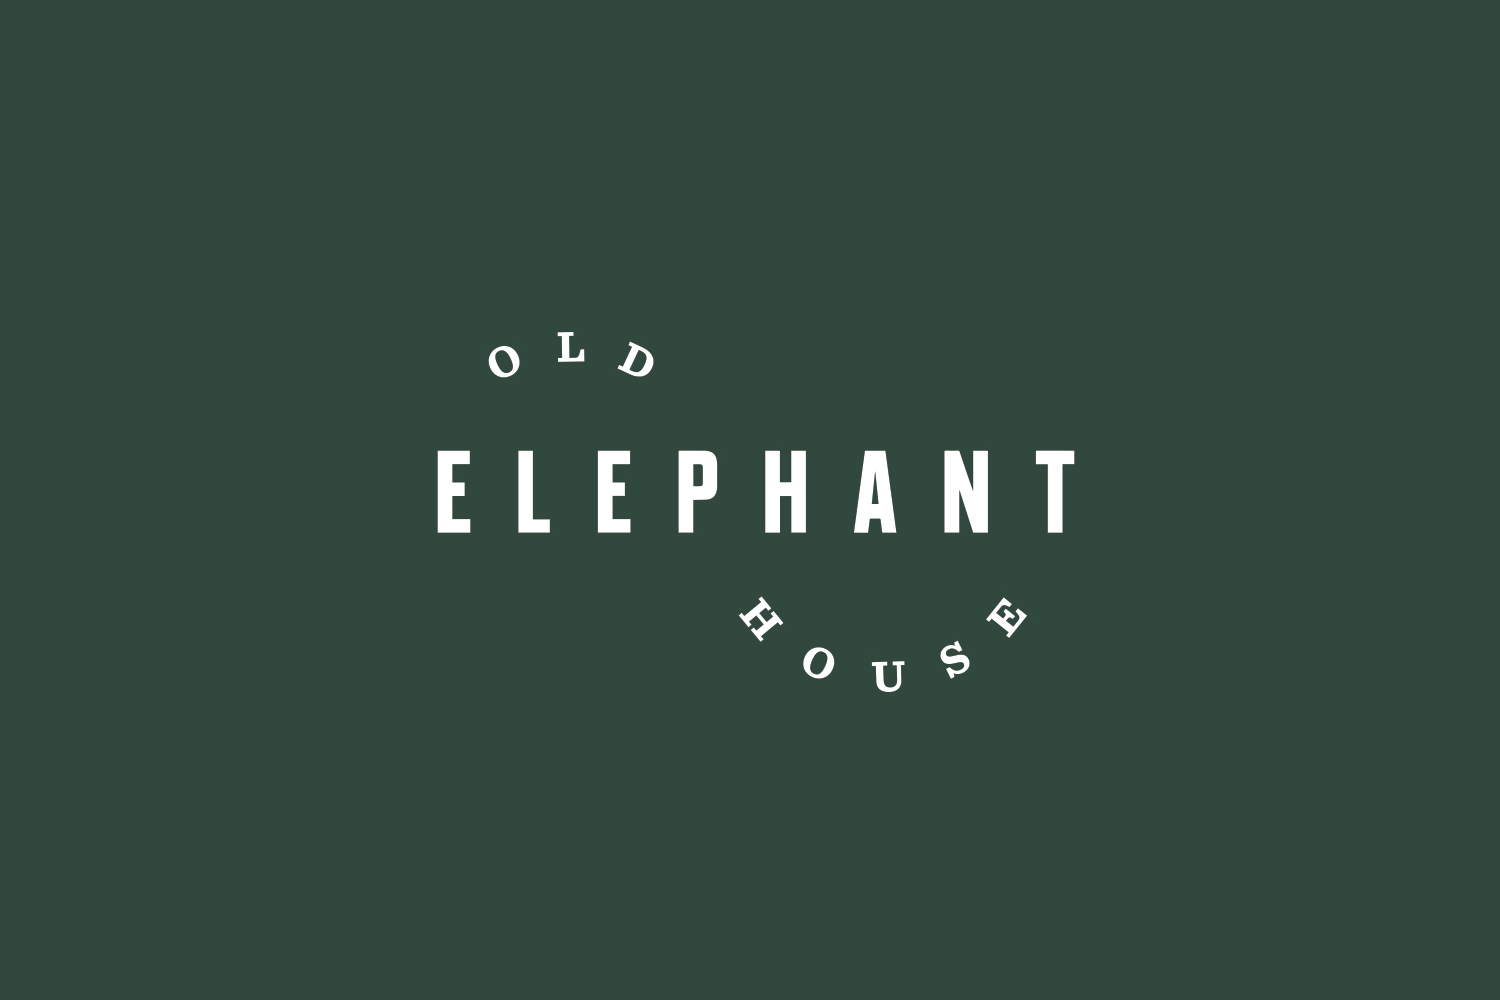 Creative Logotype Gallery & Inspiration: Old Elephant House by Studio South